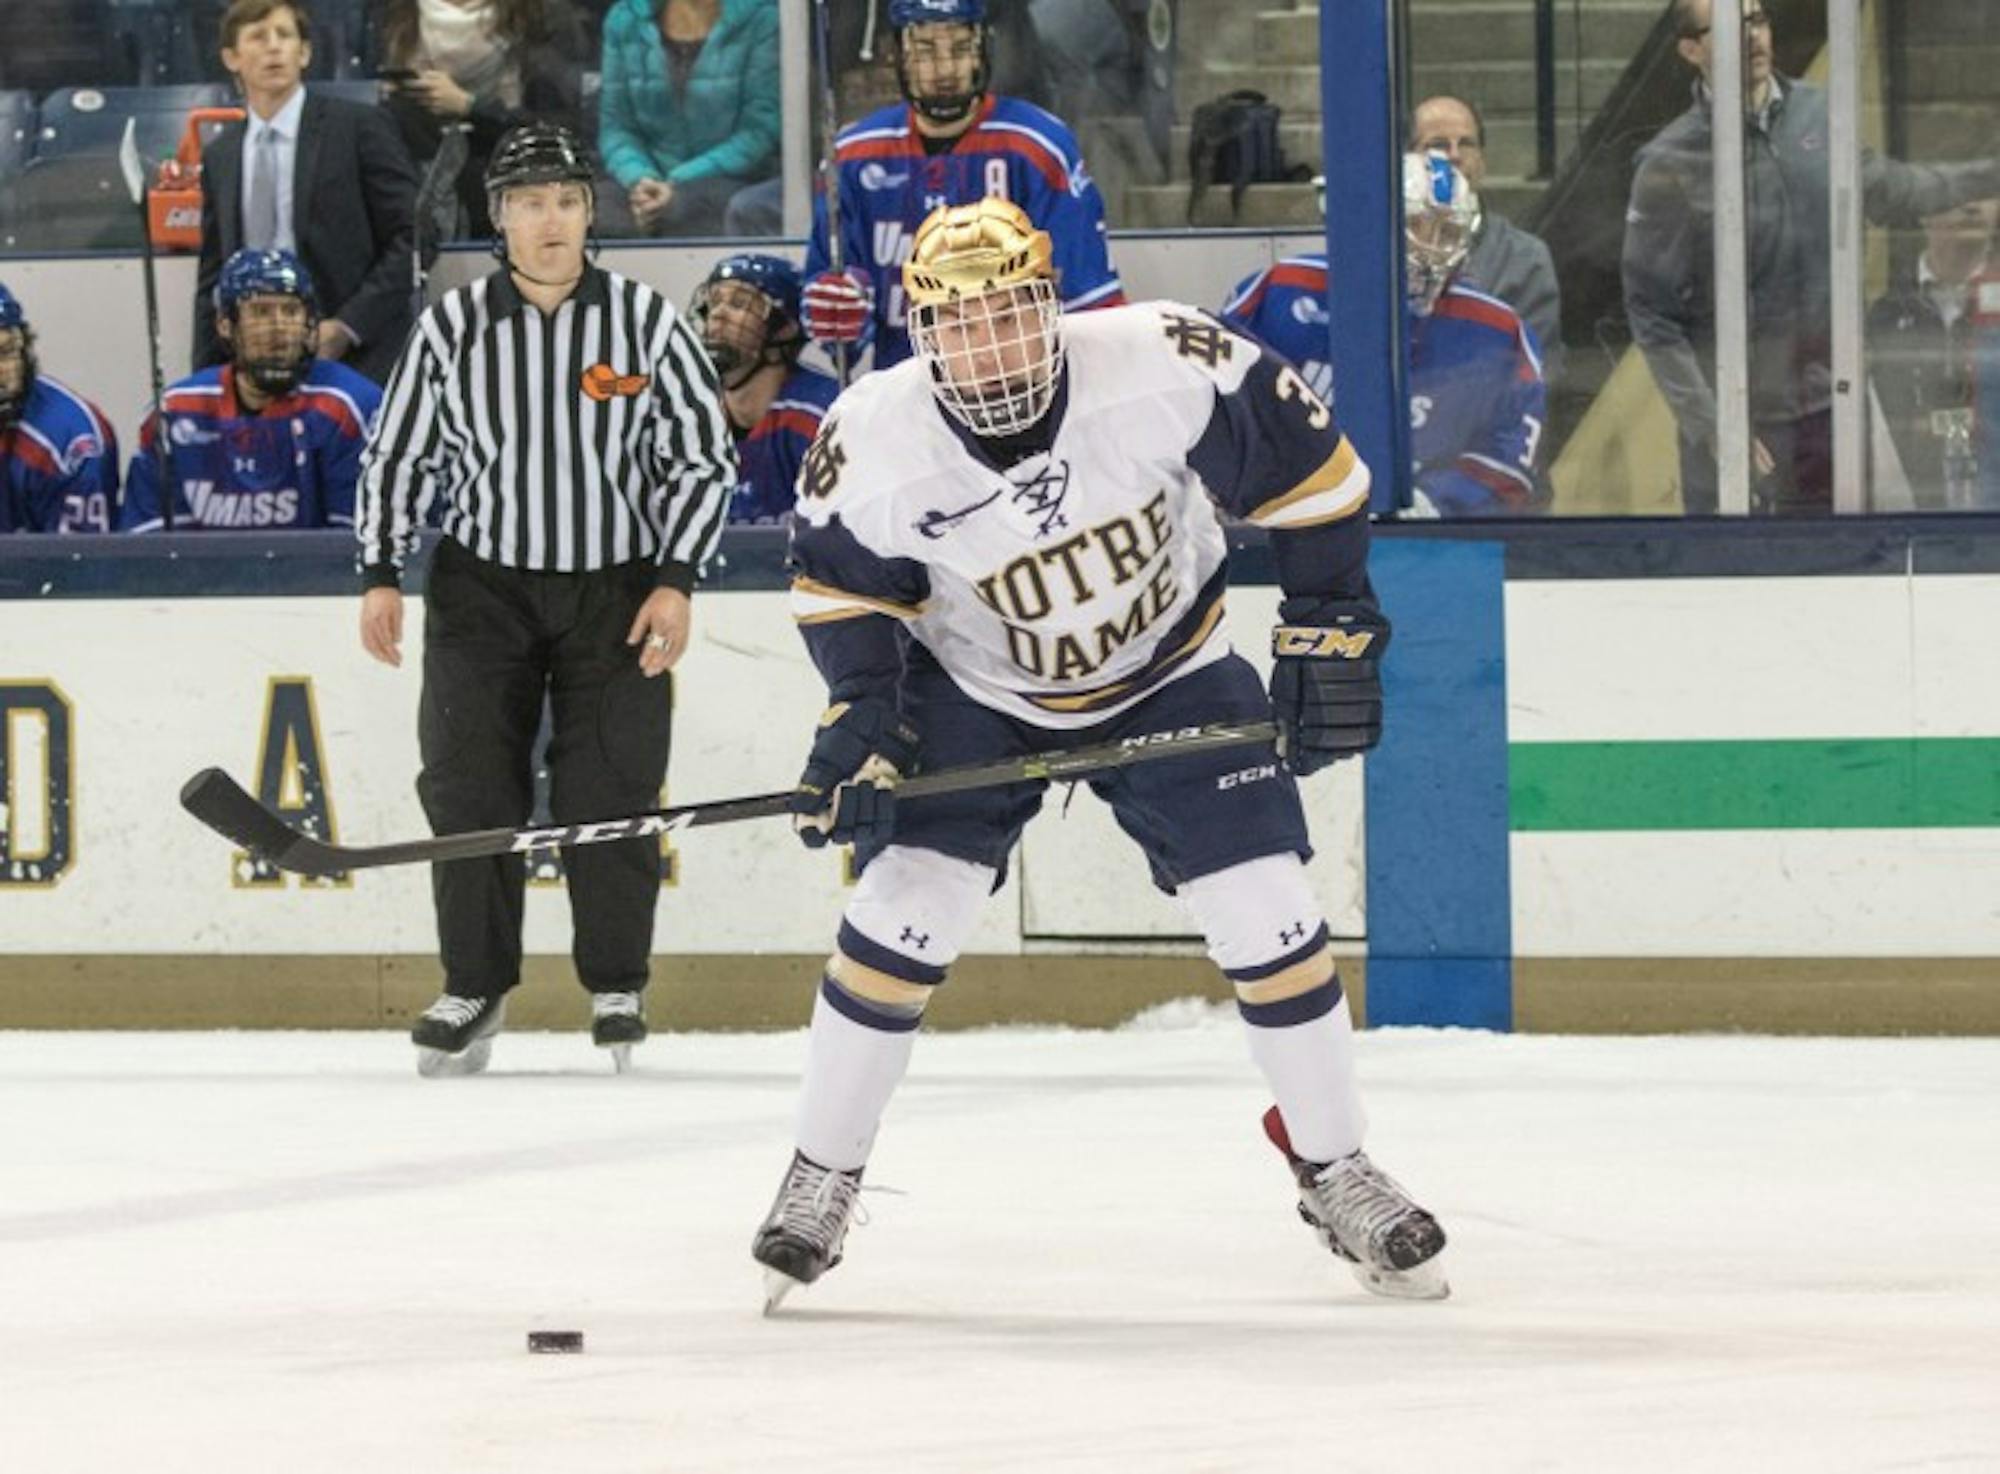 Irish junior defender Jordan Gross looks to pass the puck during Notre Dame’s 4-1 loss to UMass Lowell on Nov. 17 at Compton Family Ice Arena. Gross picked up an assist on Notre Dame’s lone goal in the game.